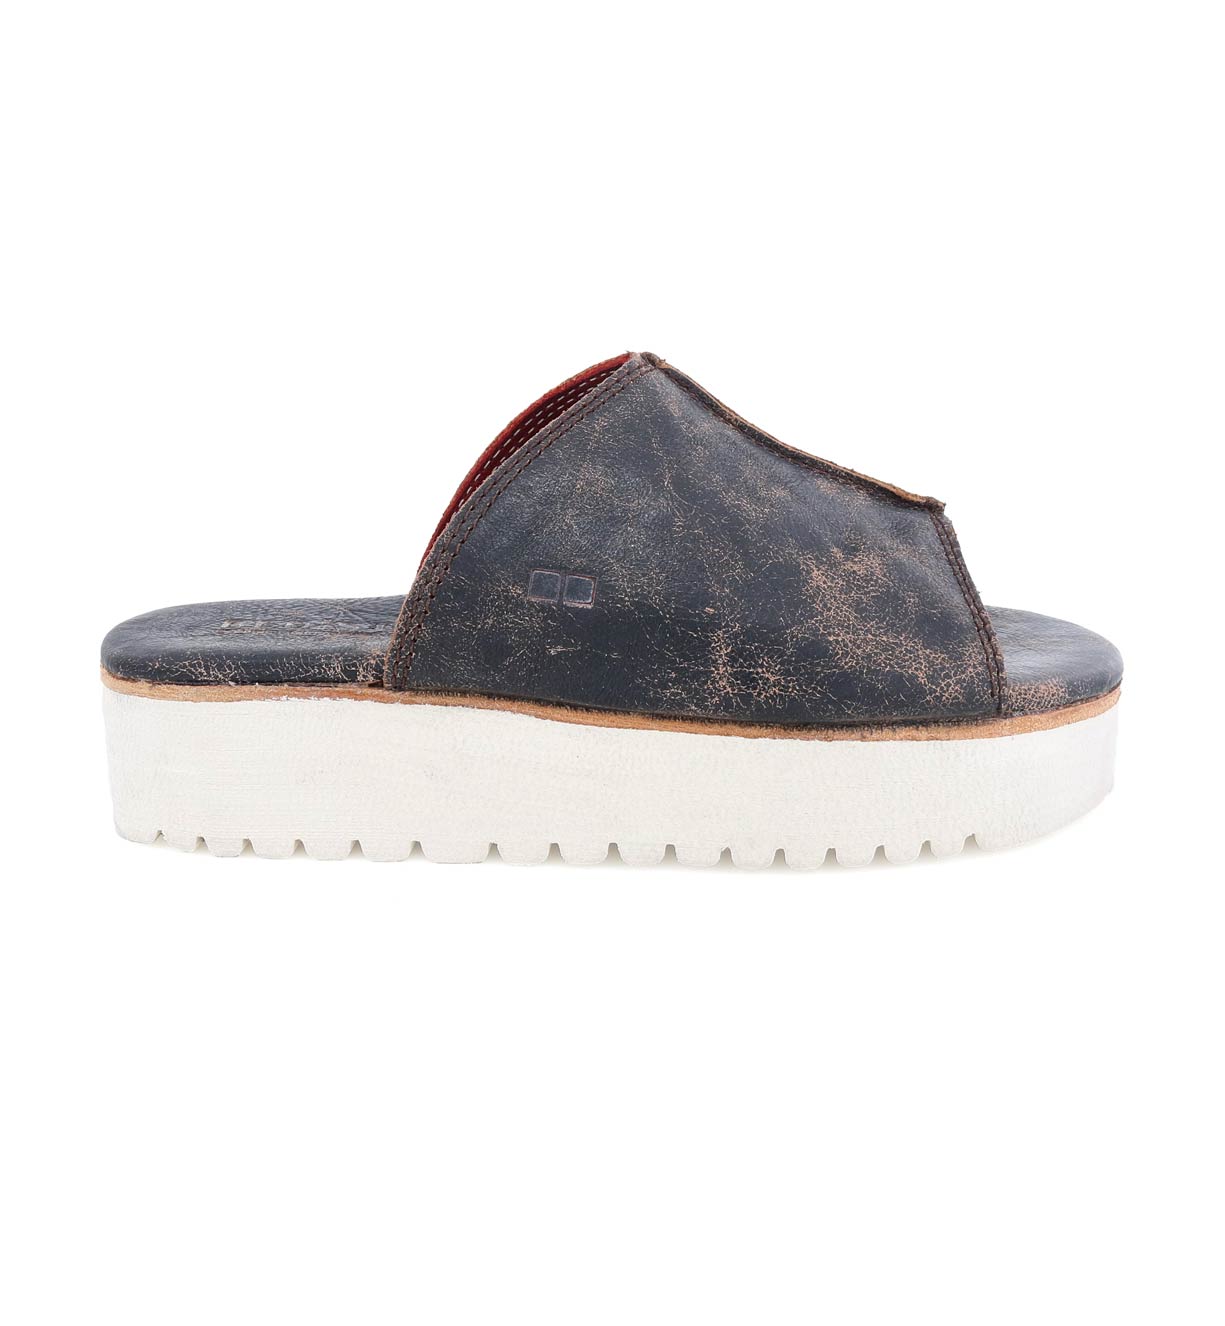 A women's Fairlee II leather slide sandal with a white sole by Bed Stu.